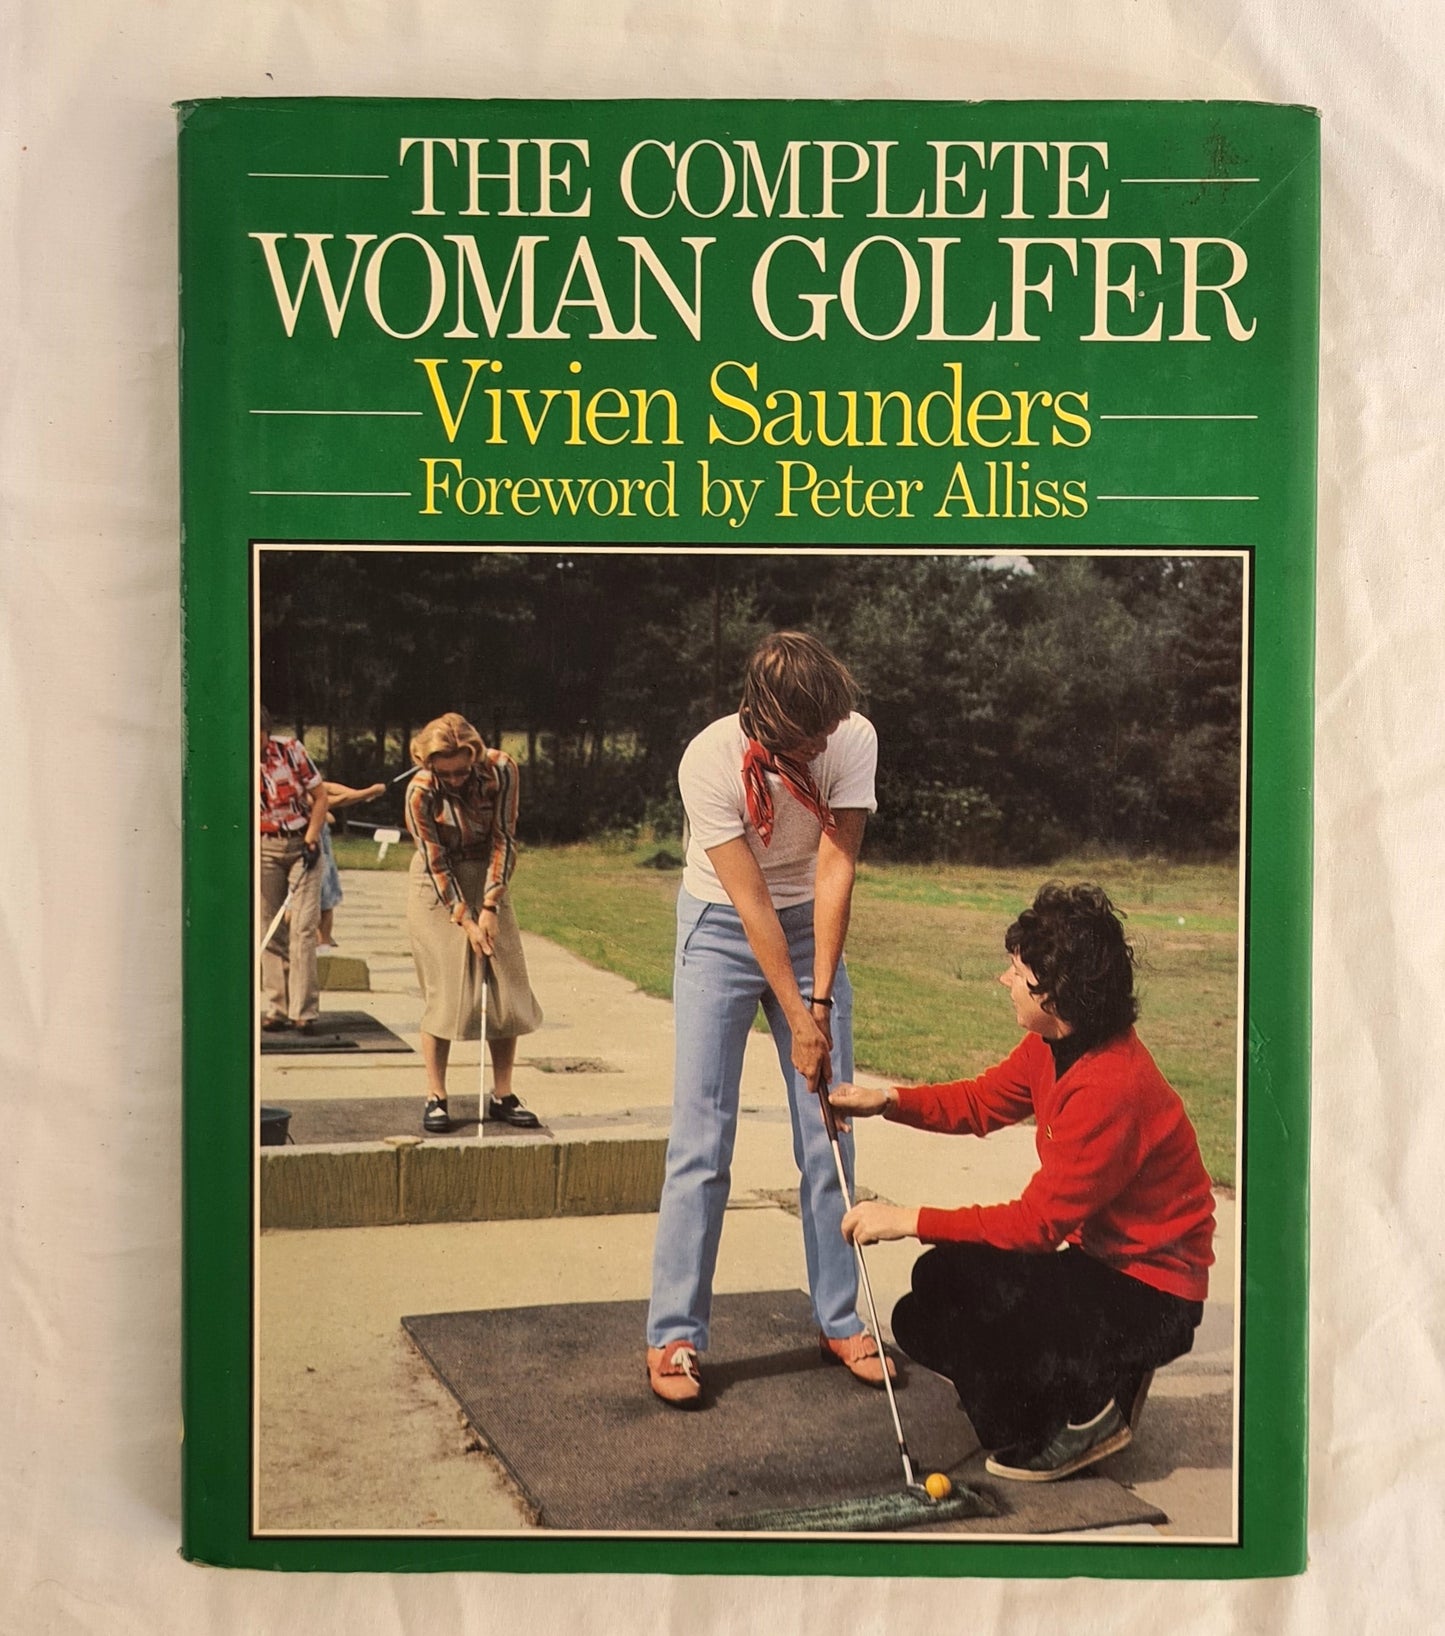 The Complete Woman Golfer  by Vivian Saunders